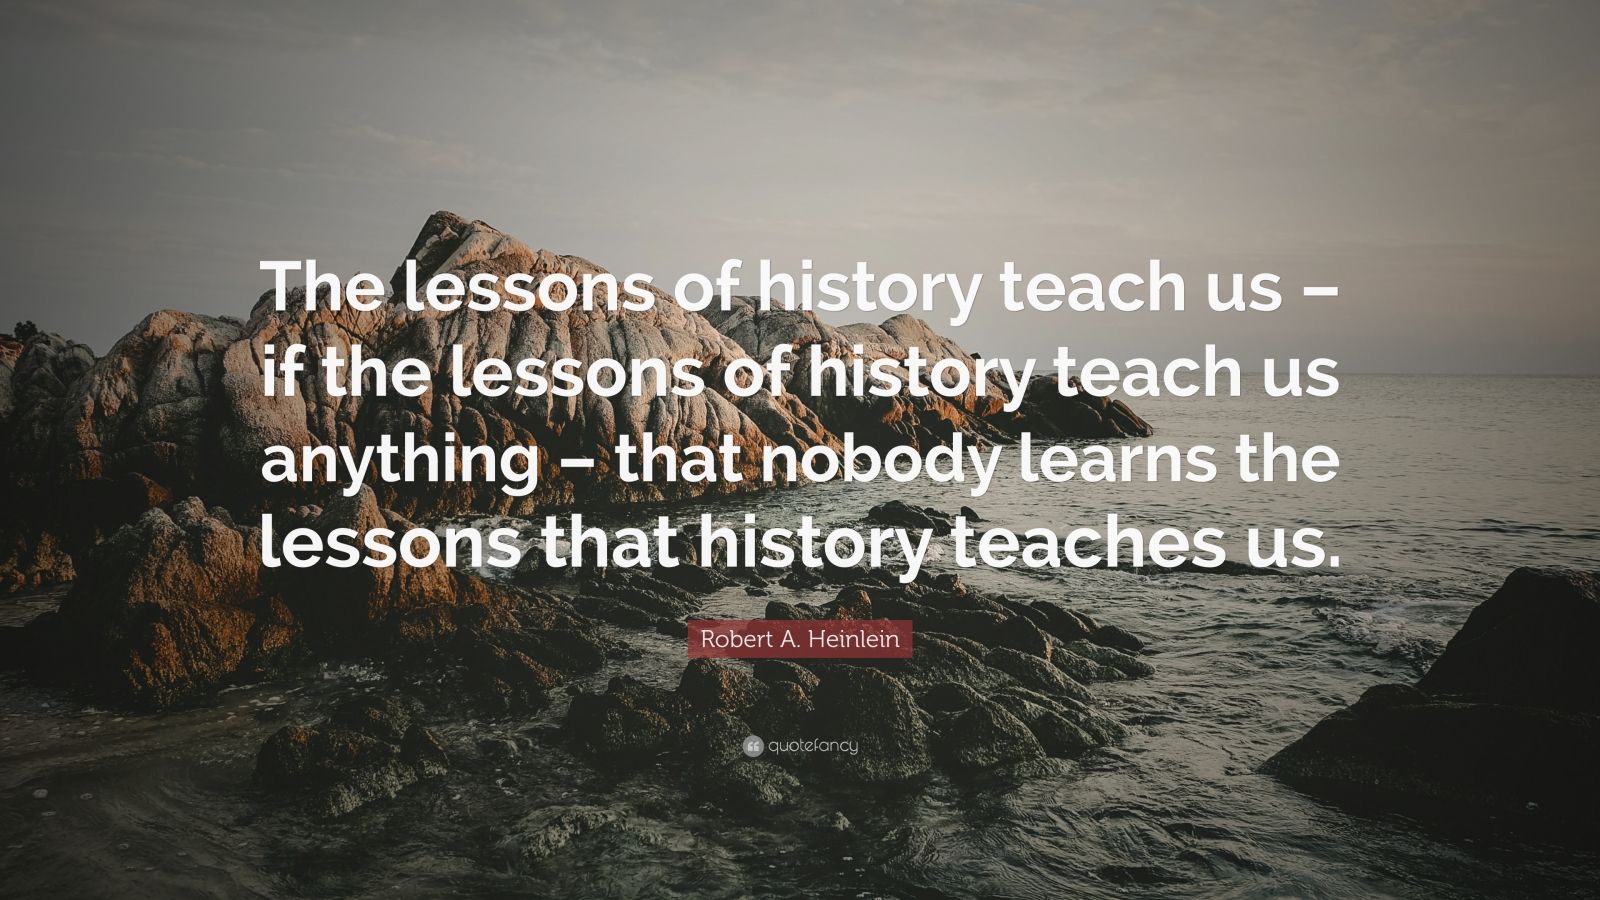 https://quotefancy.com/media/wallpaper/1600x900/2844270-Robert-A-Heinlein-Quote-The-lessons-of-history-teach-us-if-the.jpg